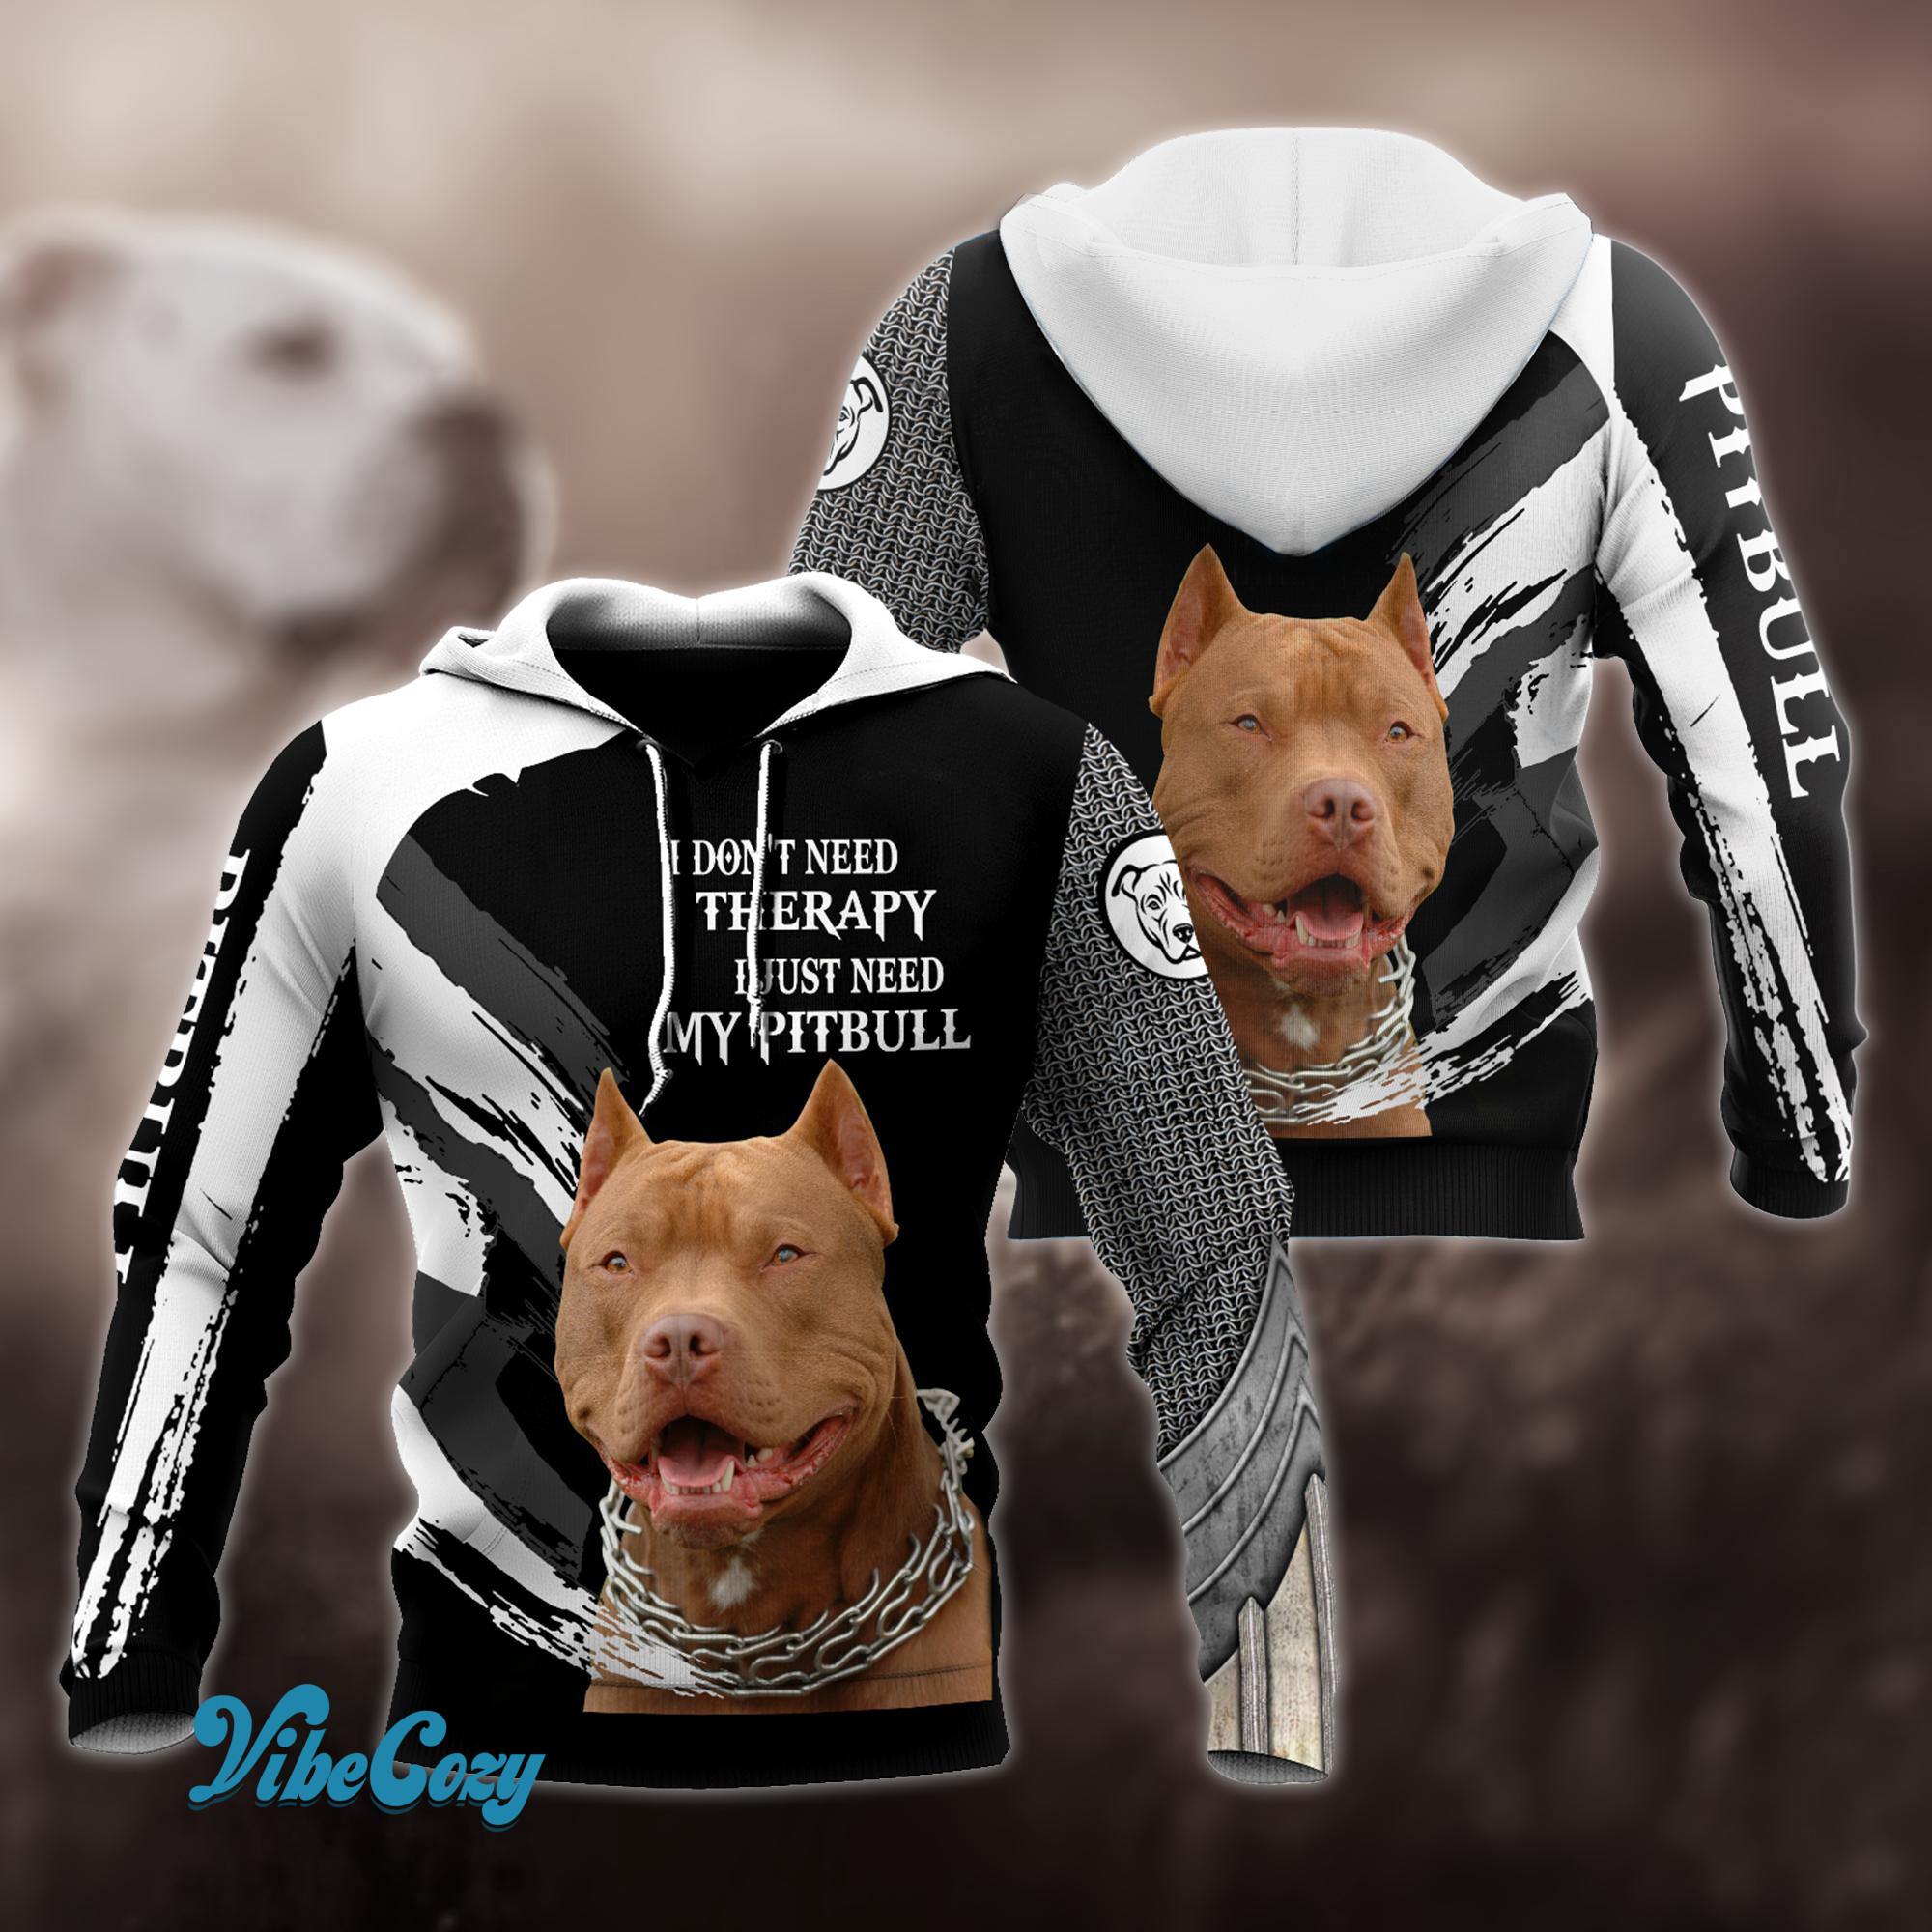 I Don't Need Therapy I Just Need My Pitbull Hoodie Shirt for Men and Women TN05102003